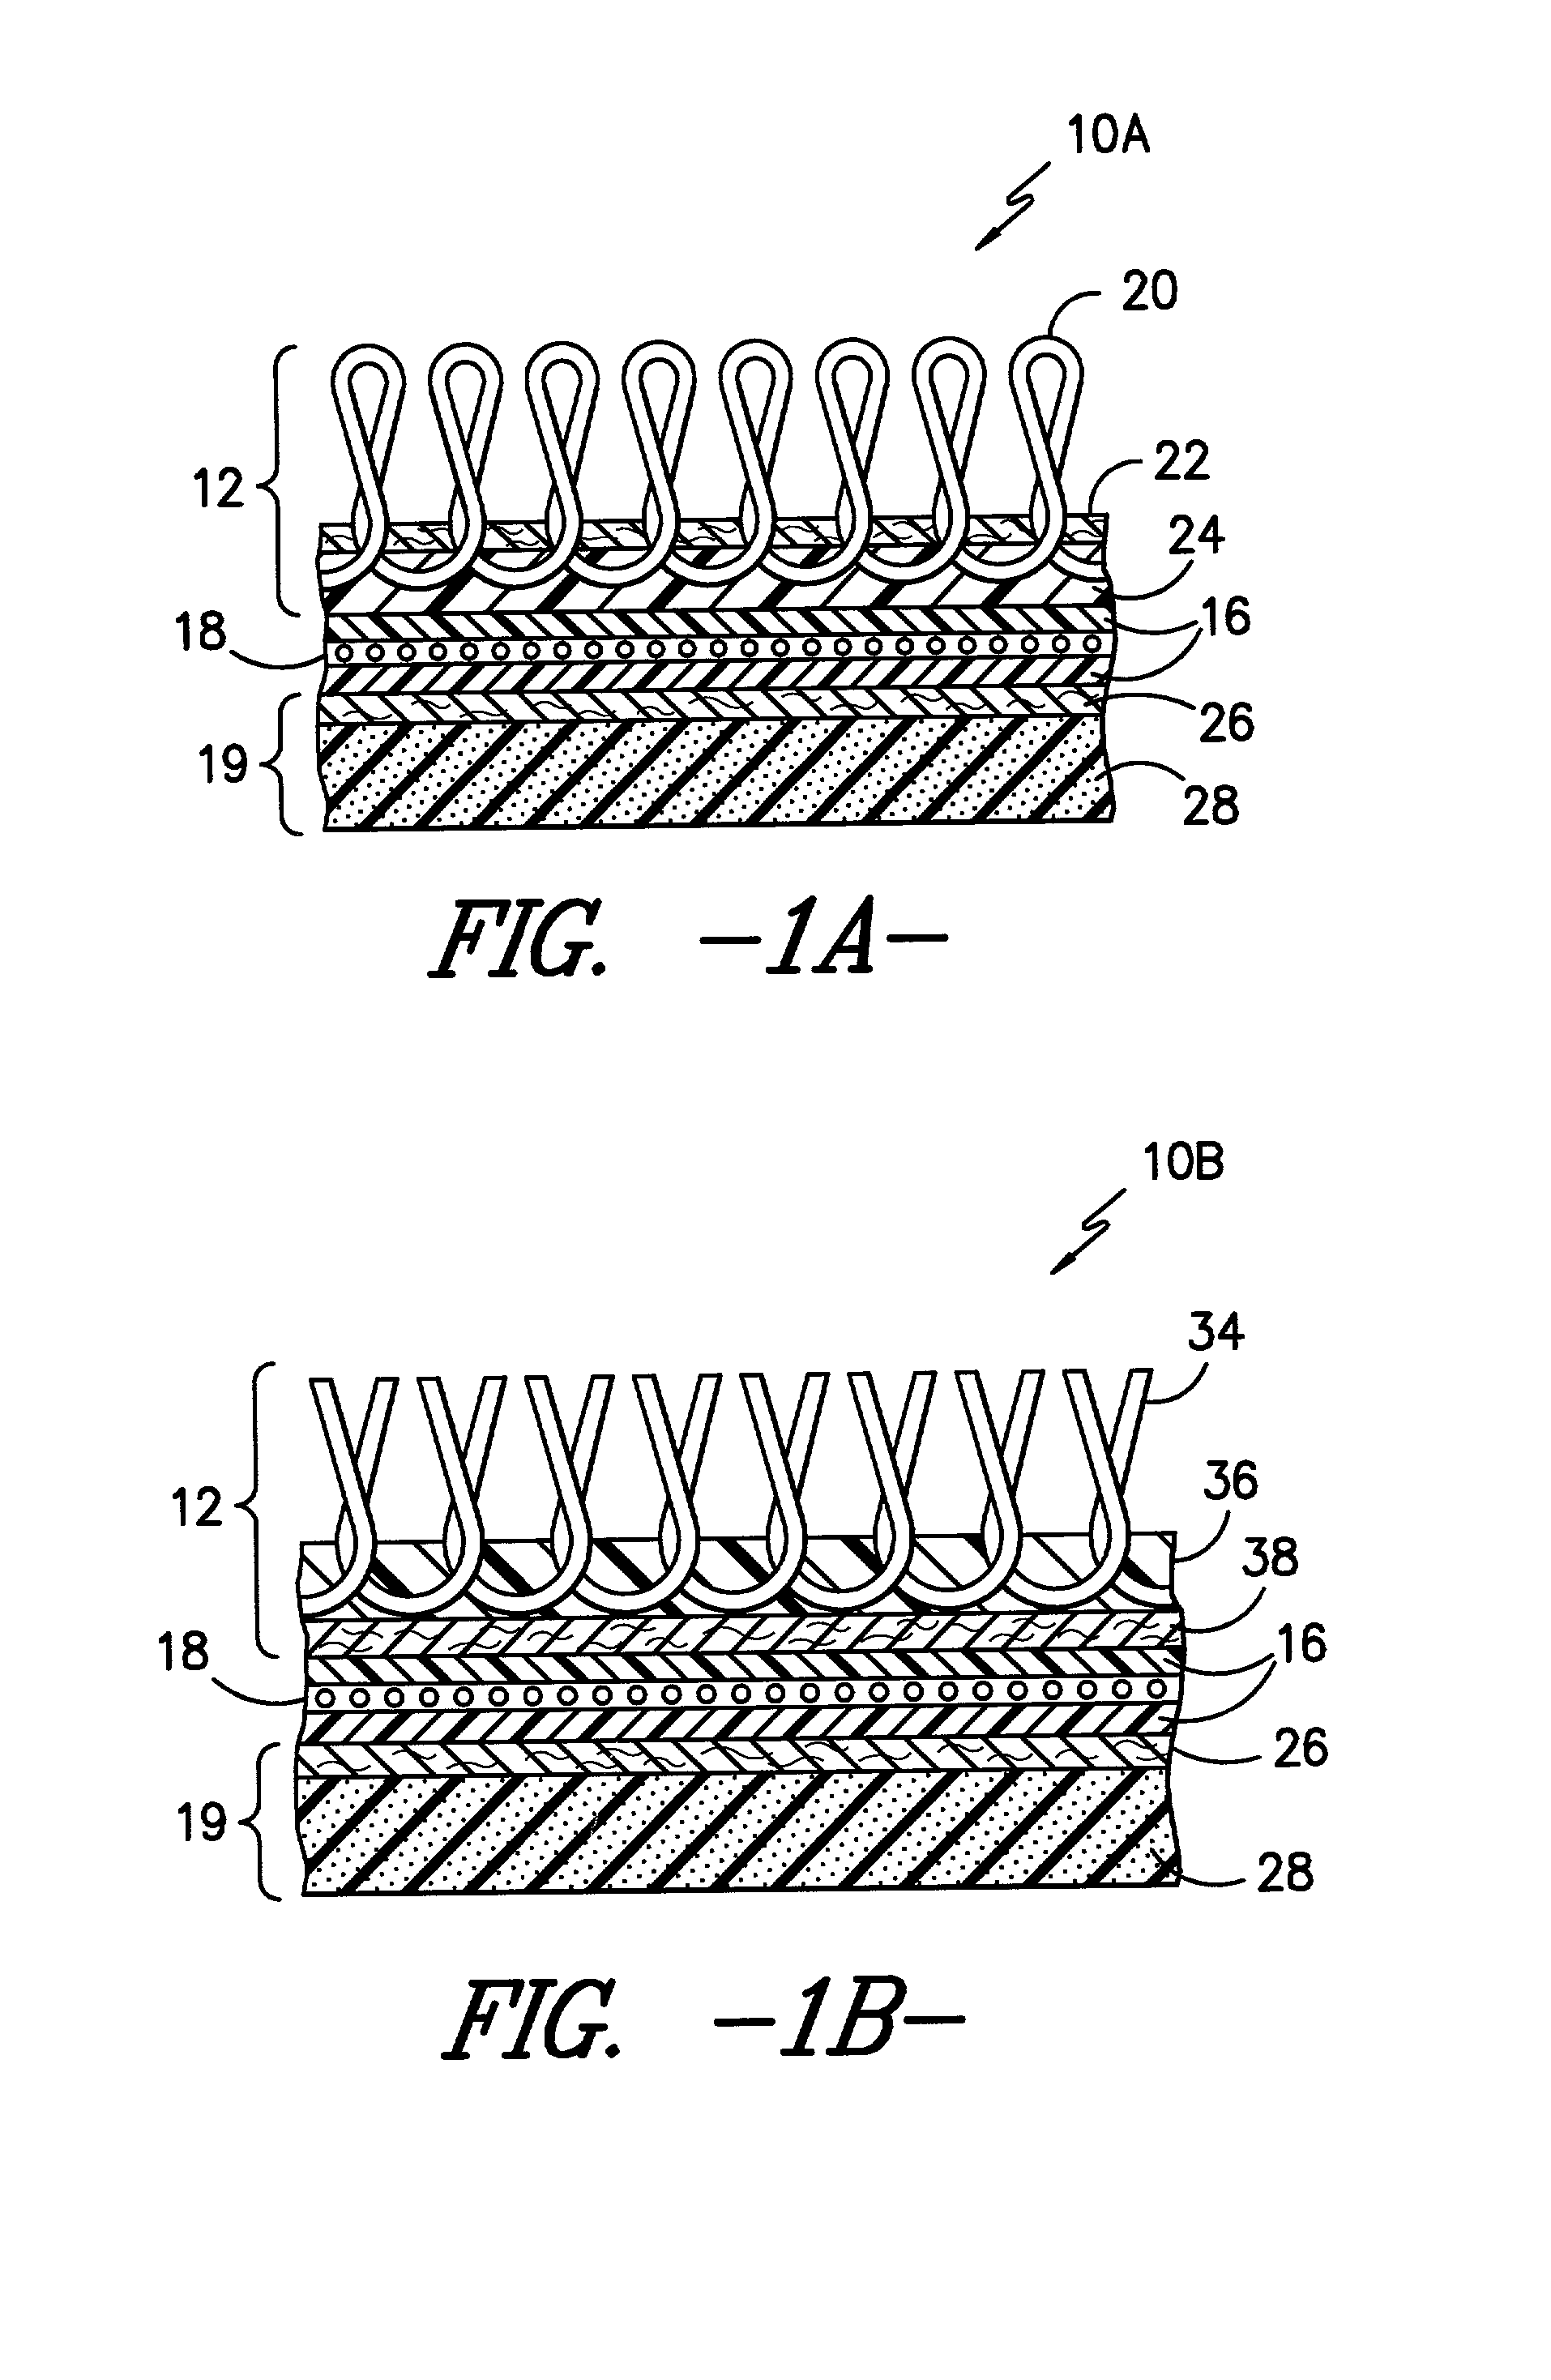 Textile product and method